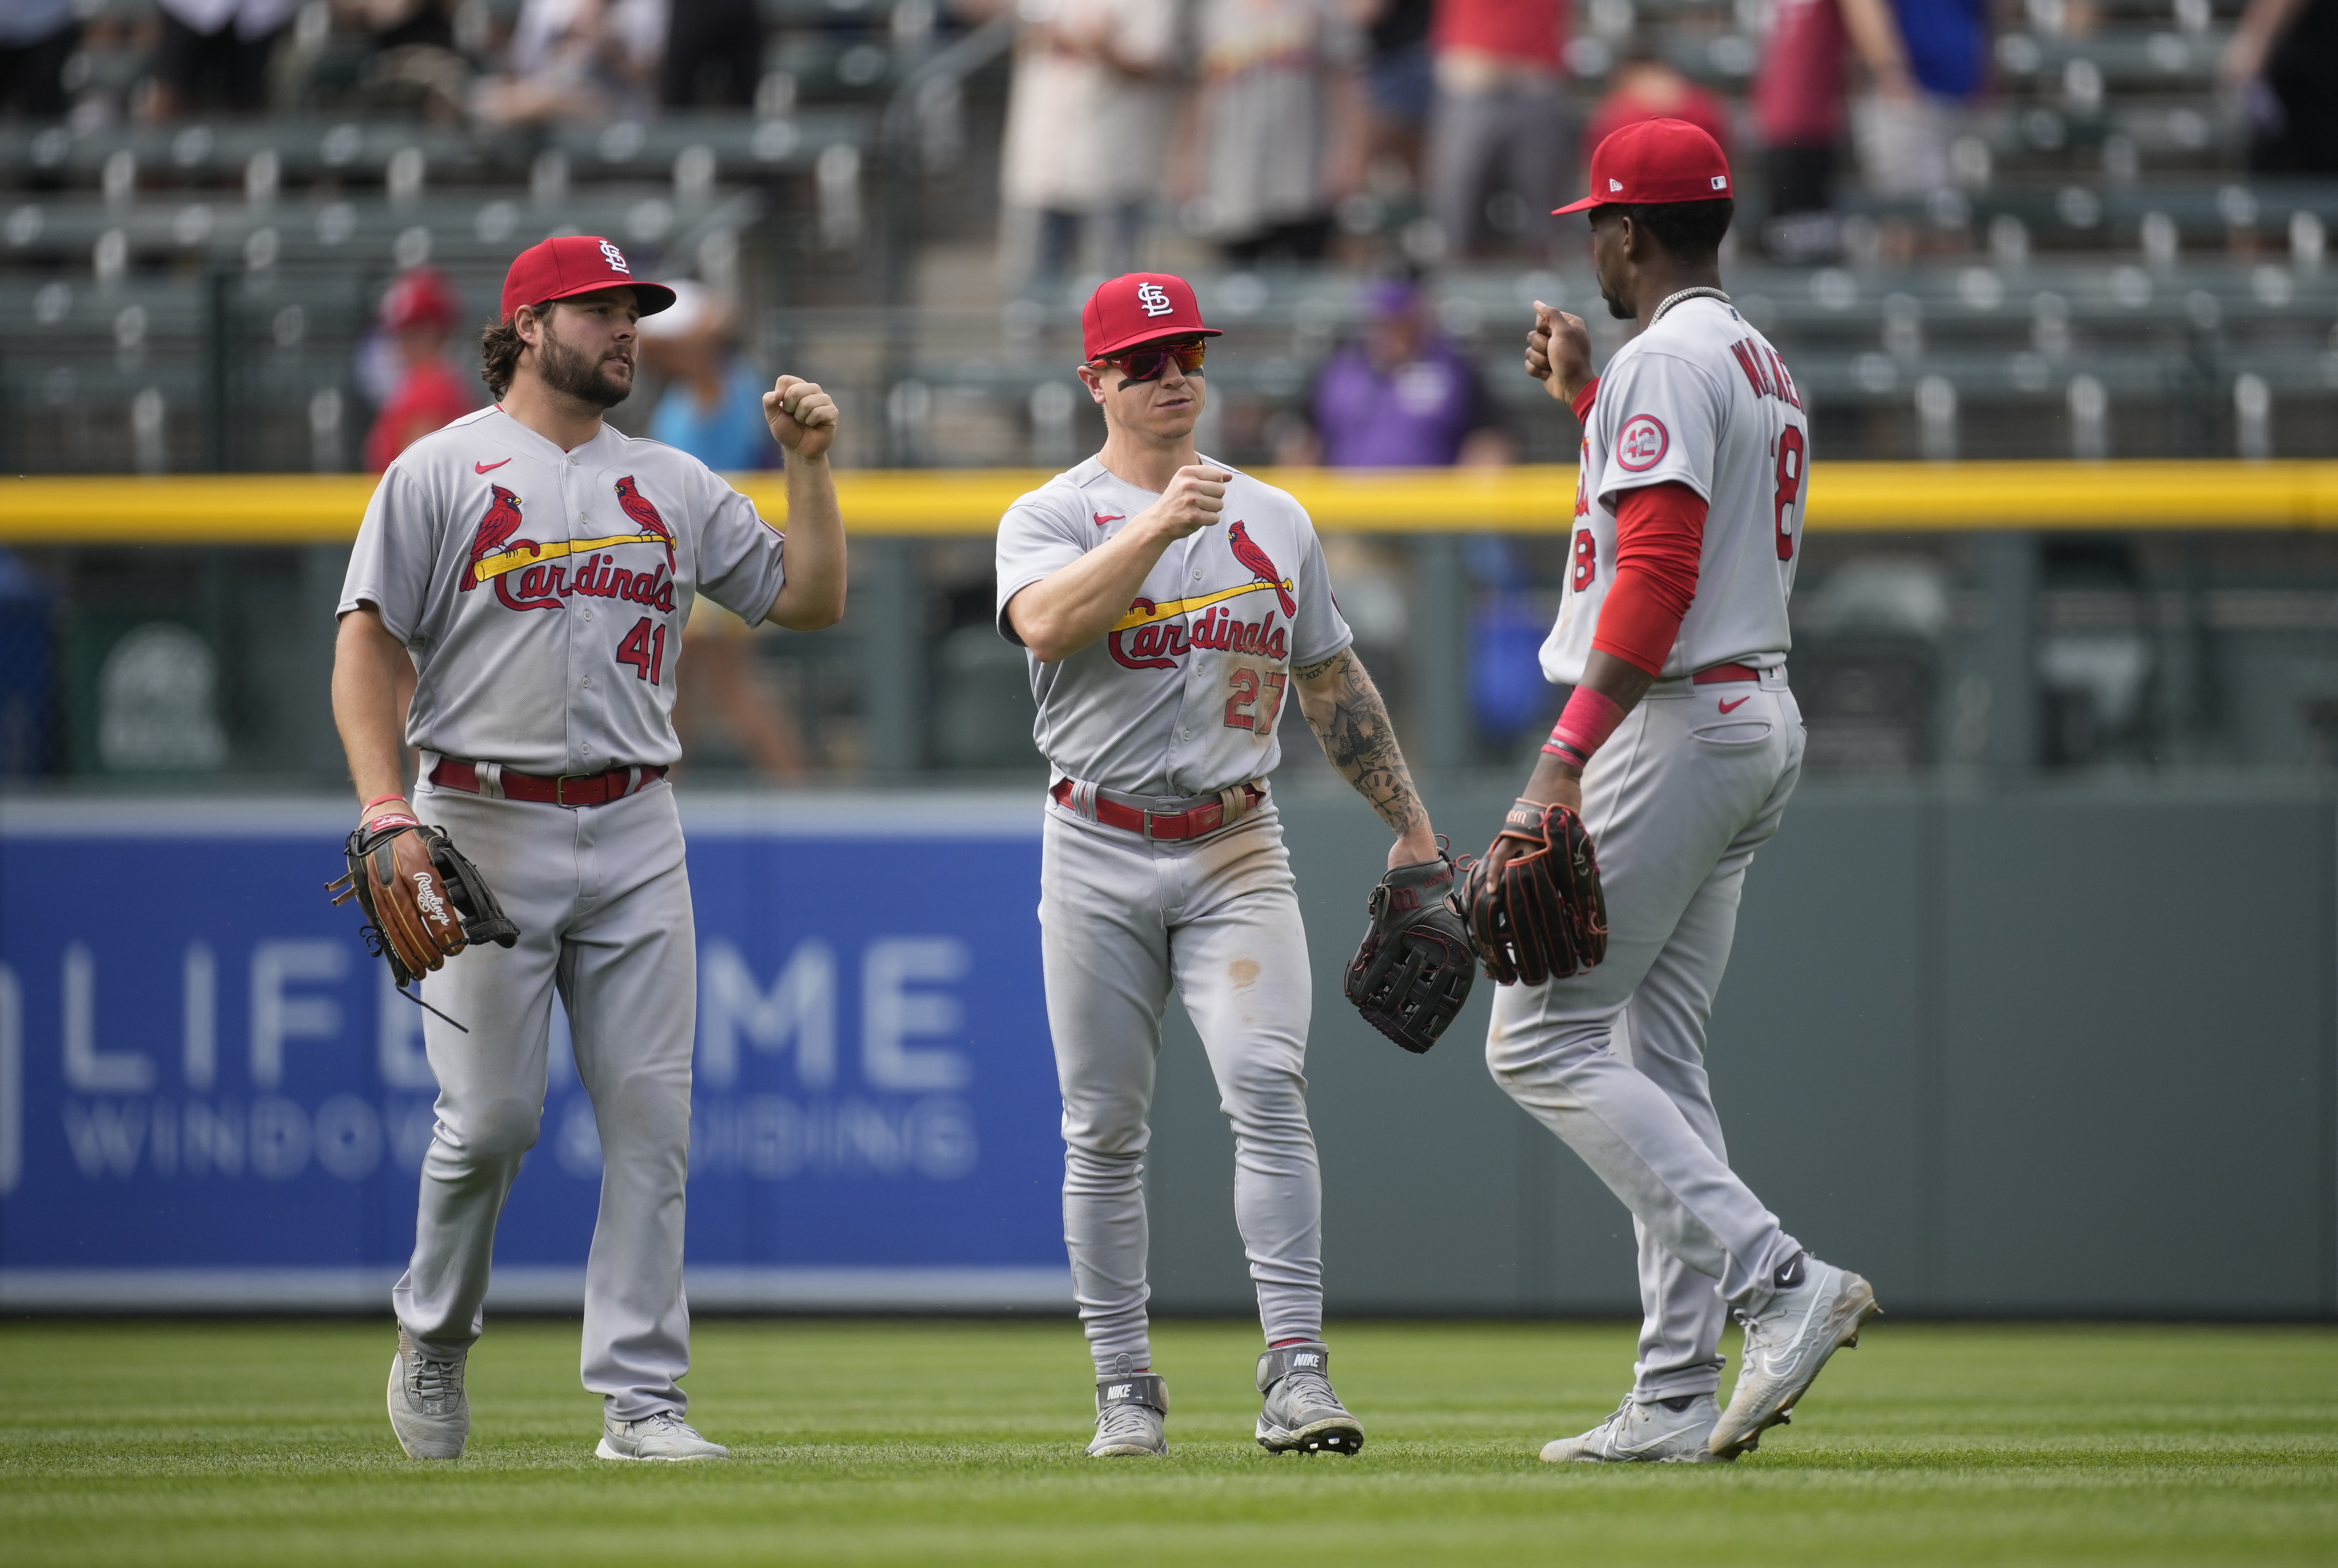 Tyler O'Neill competing for center field job with Cardinals